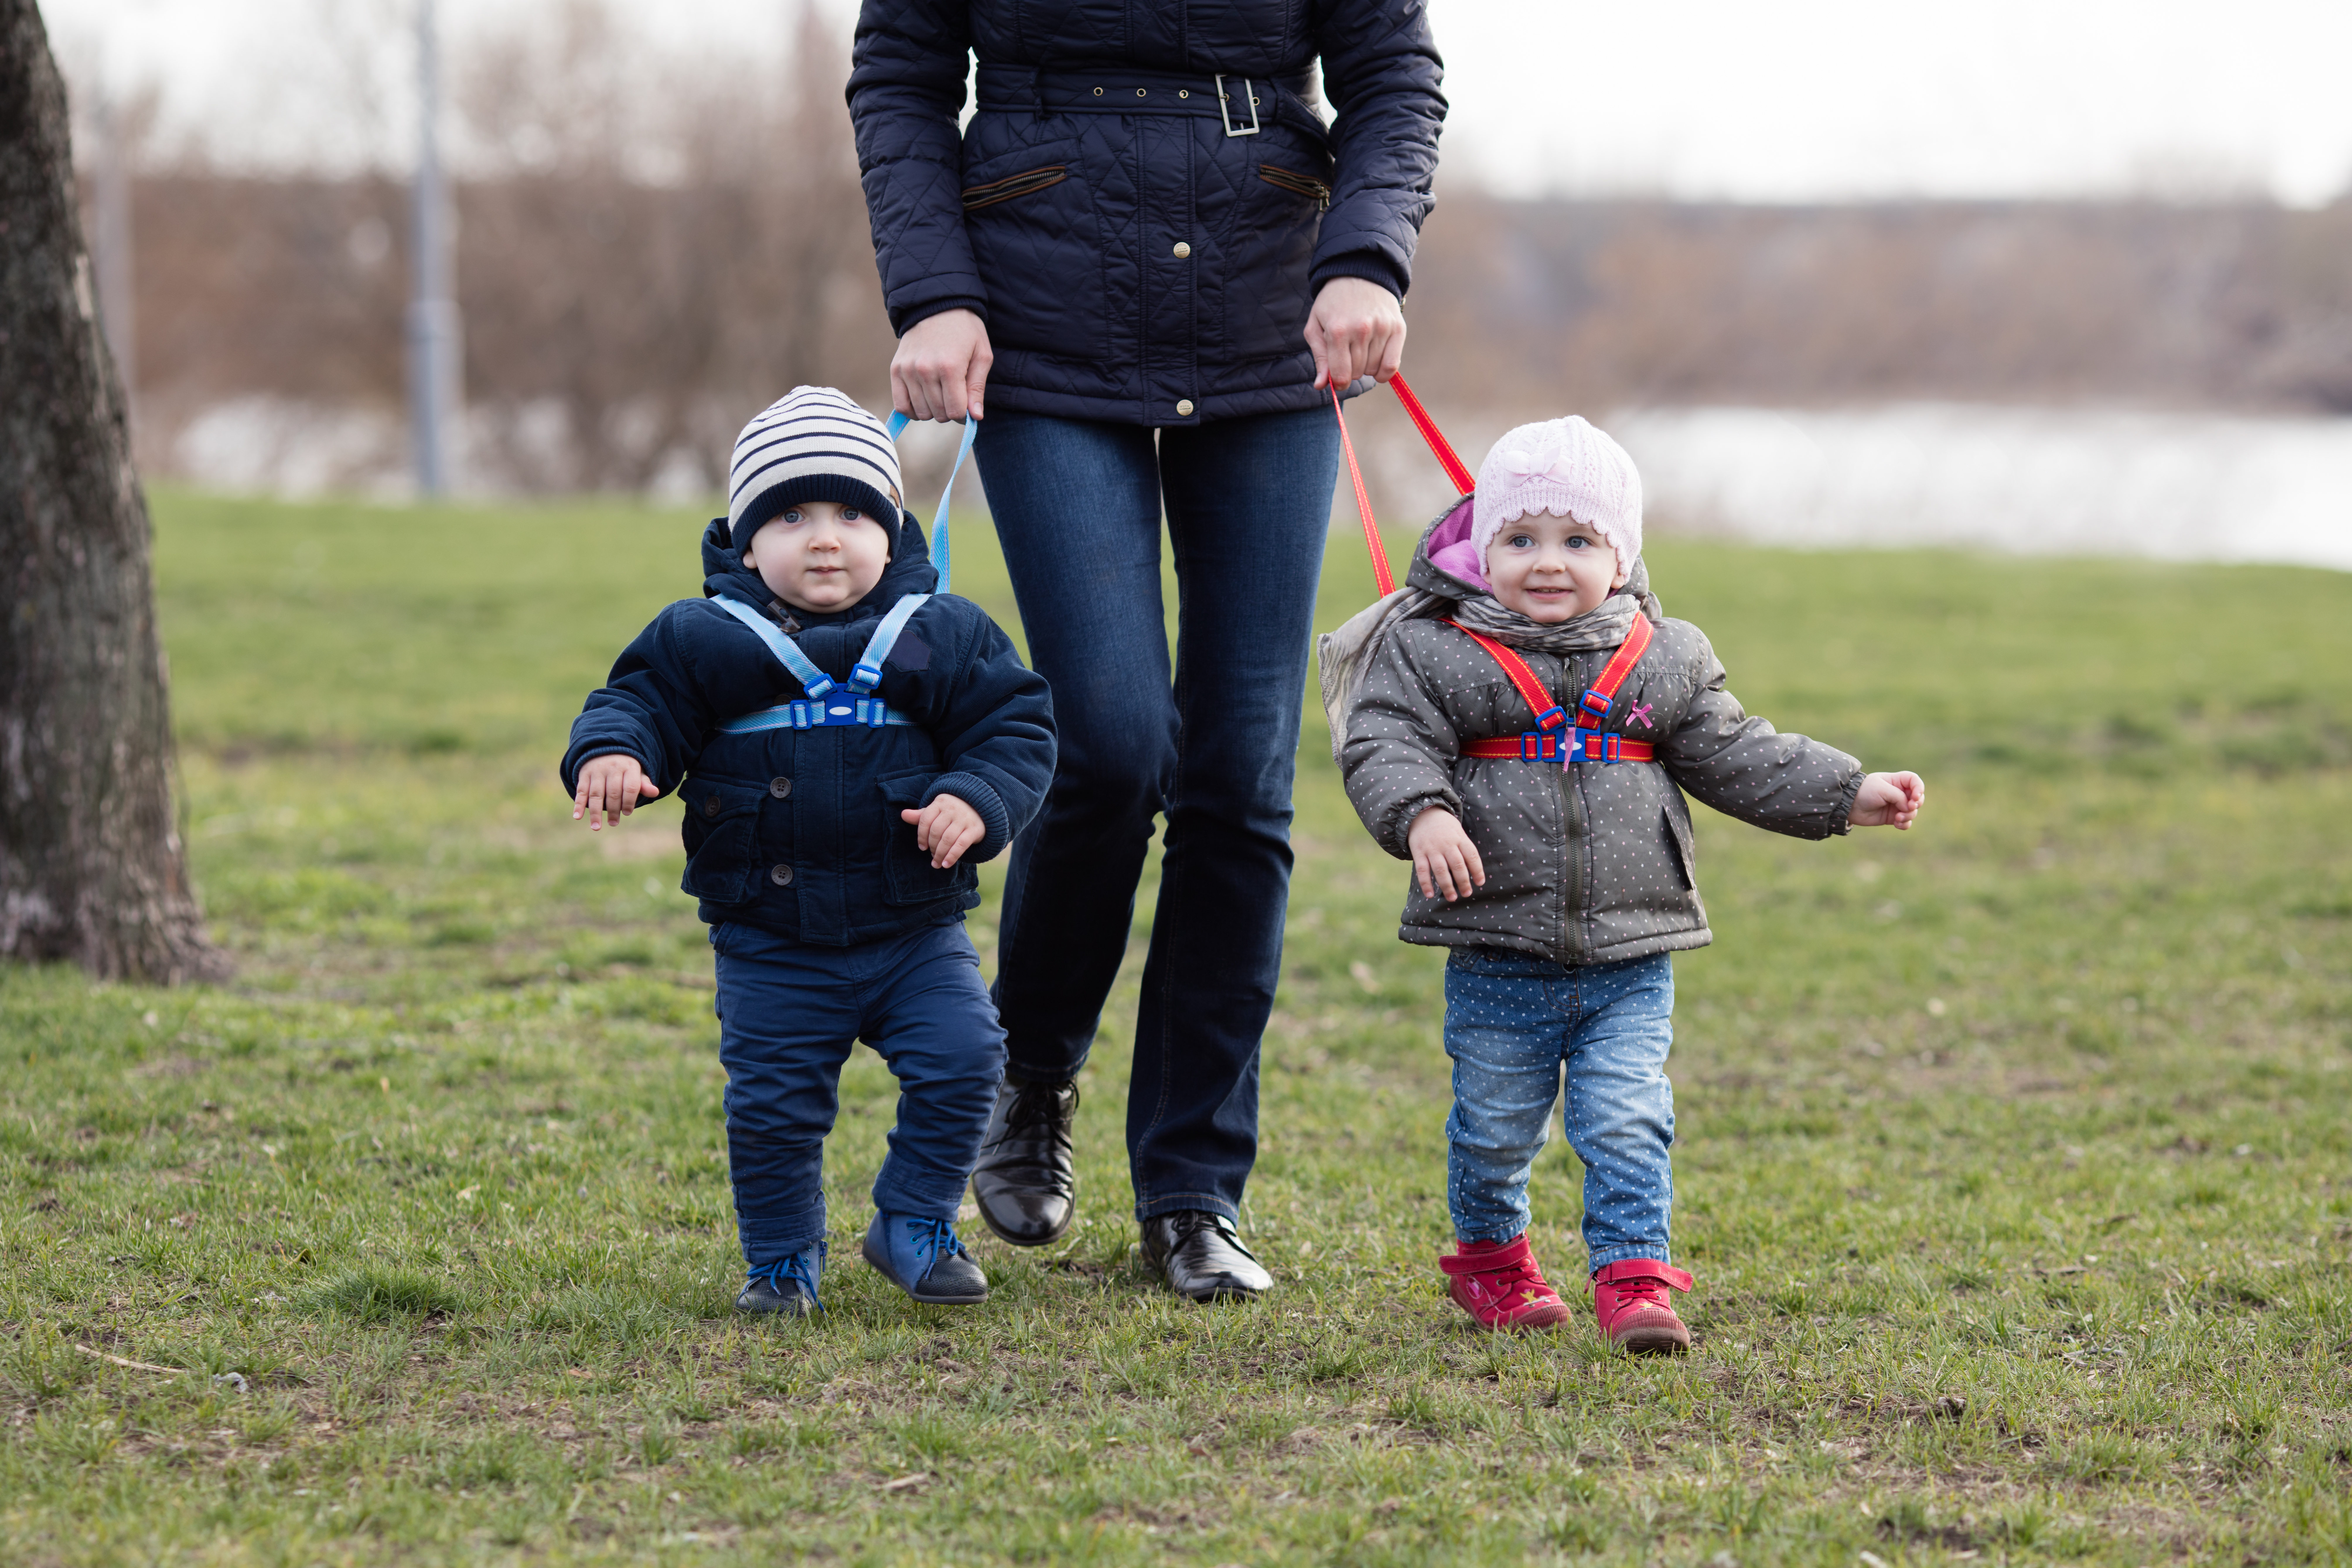 A woman walking with two children on leashes | Source: Shutterstock